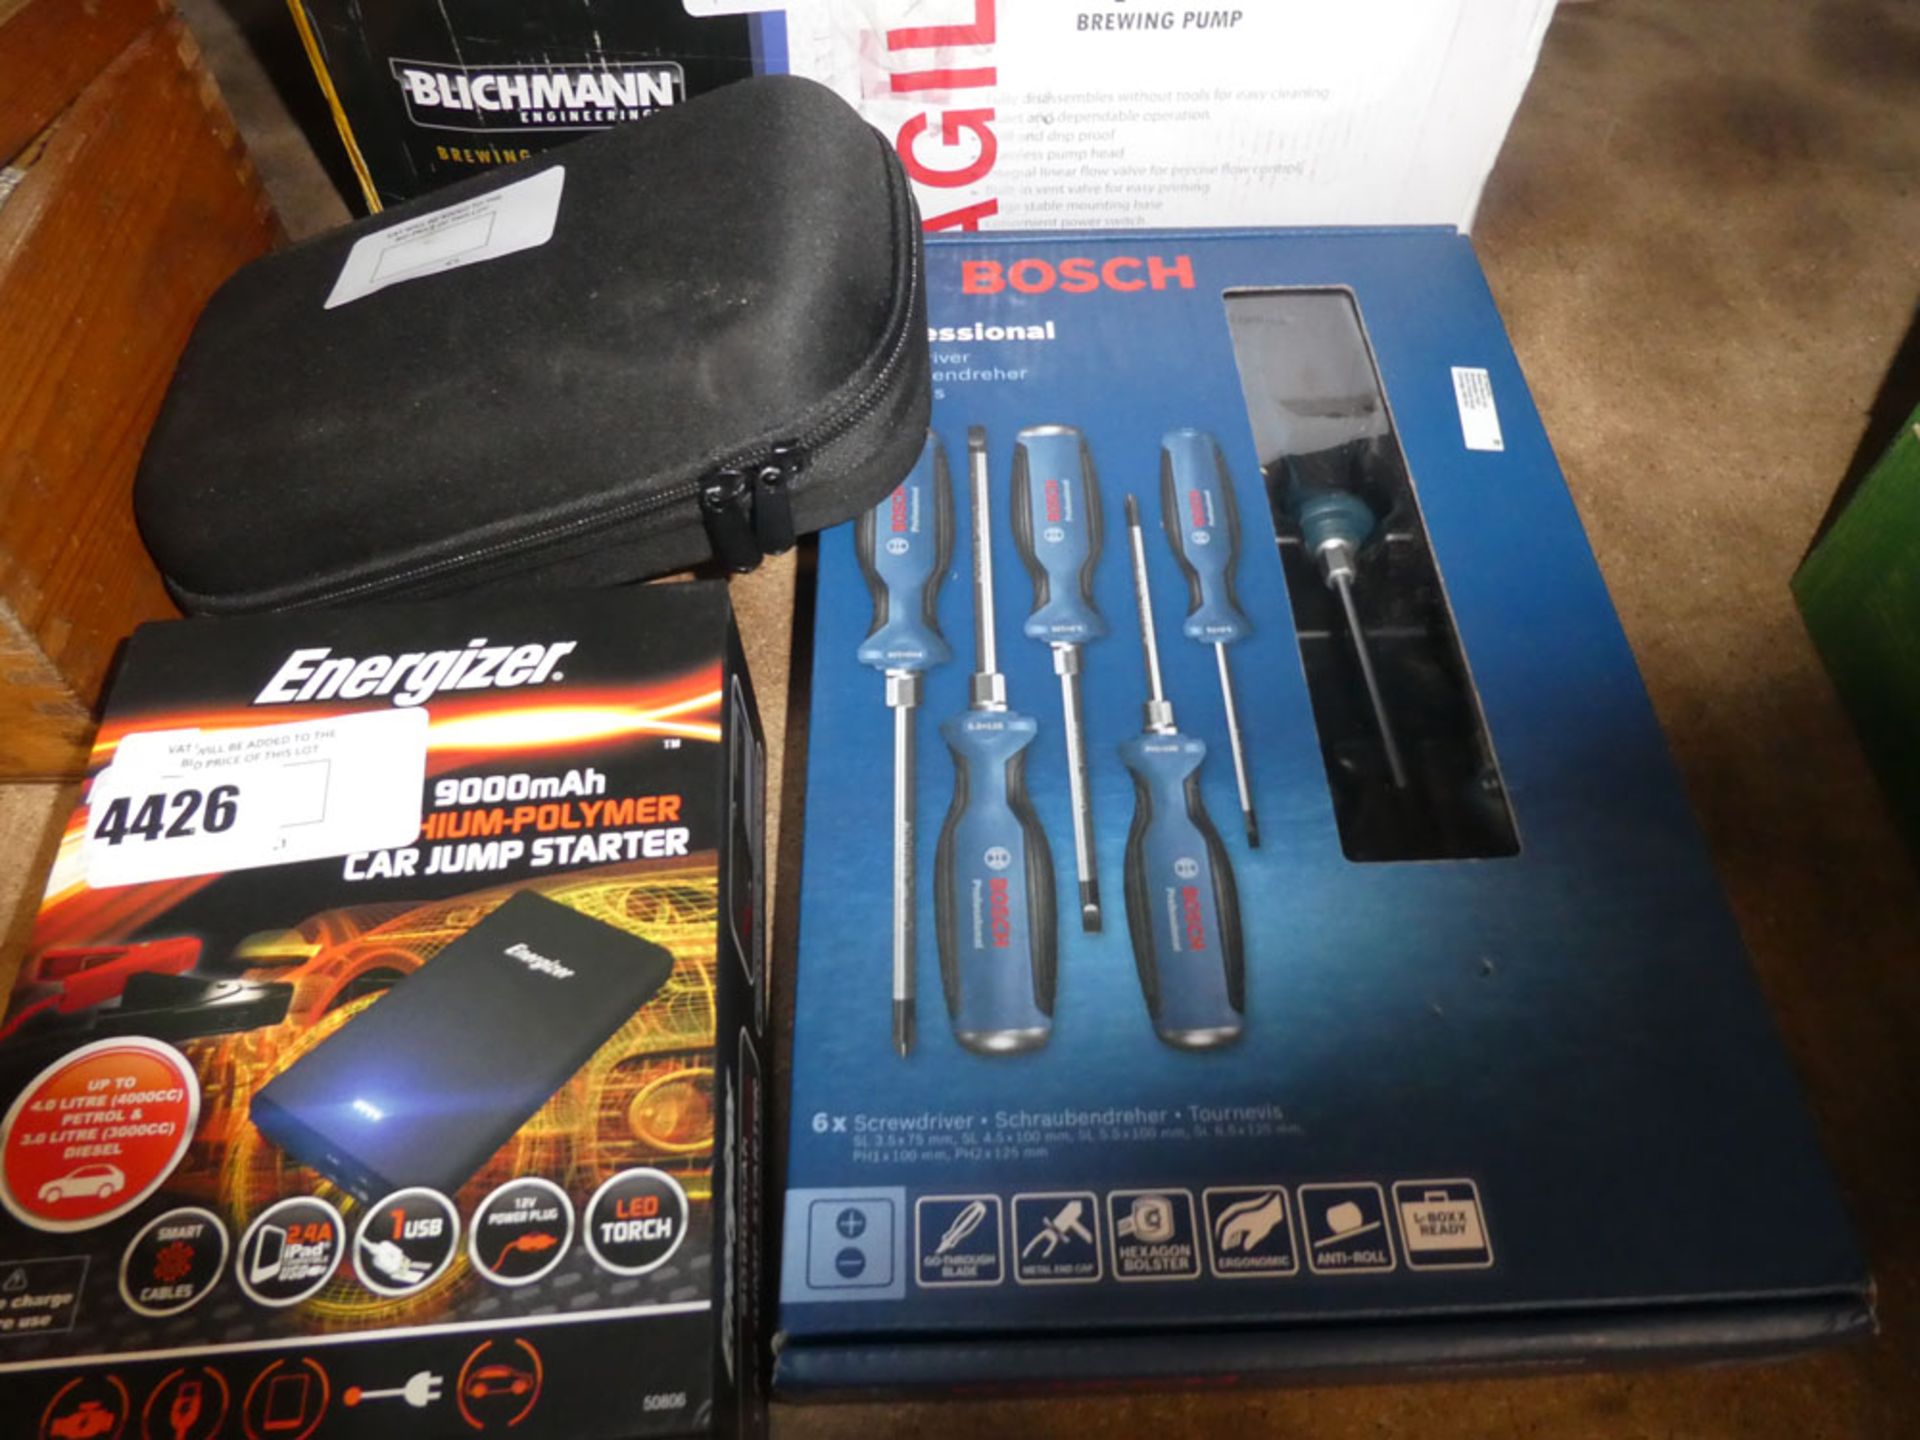 Energiser car jumpstart and box of Bosch screwdrivers, and powerbank